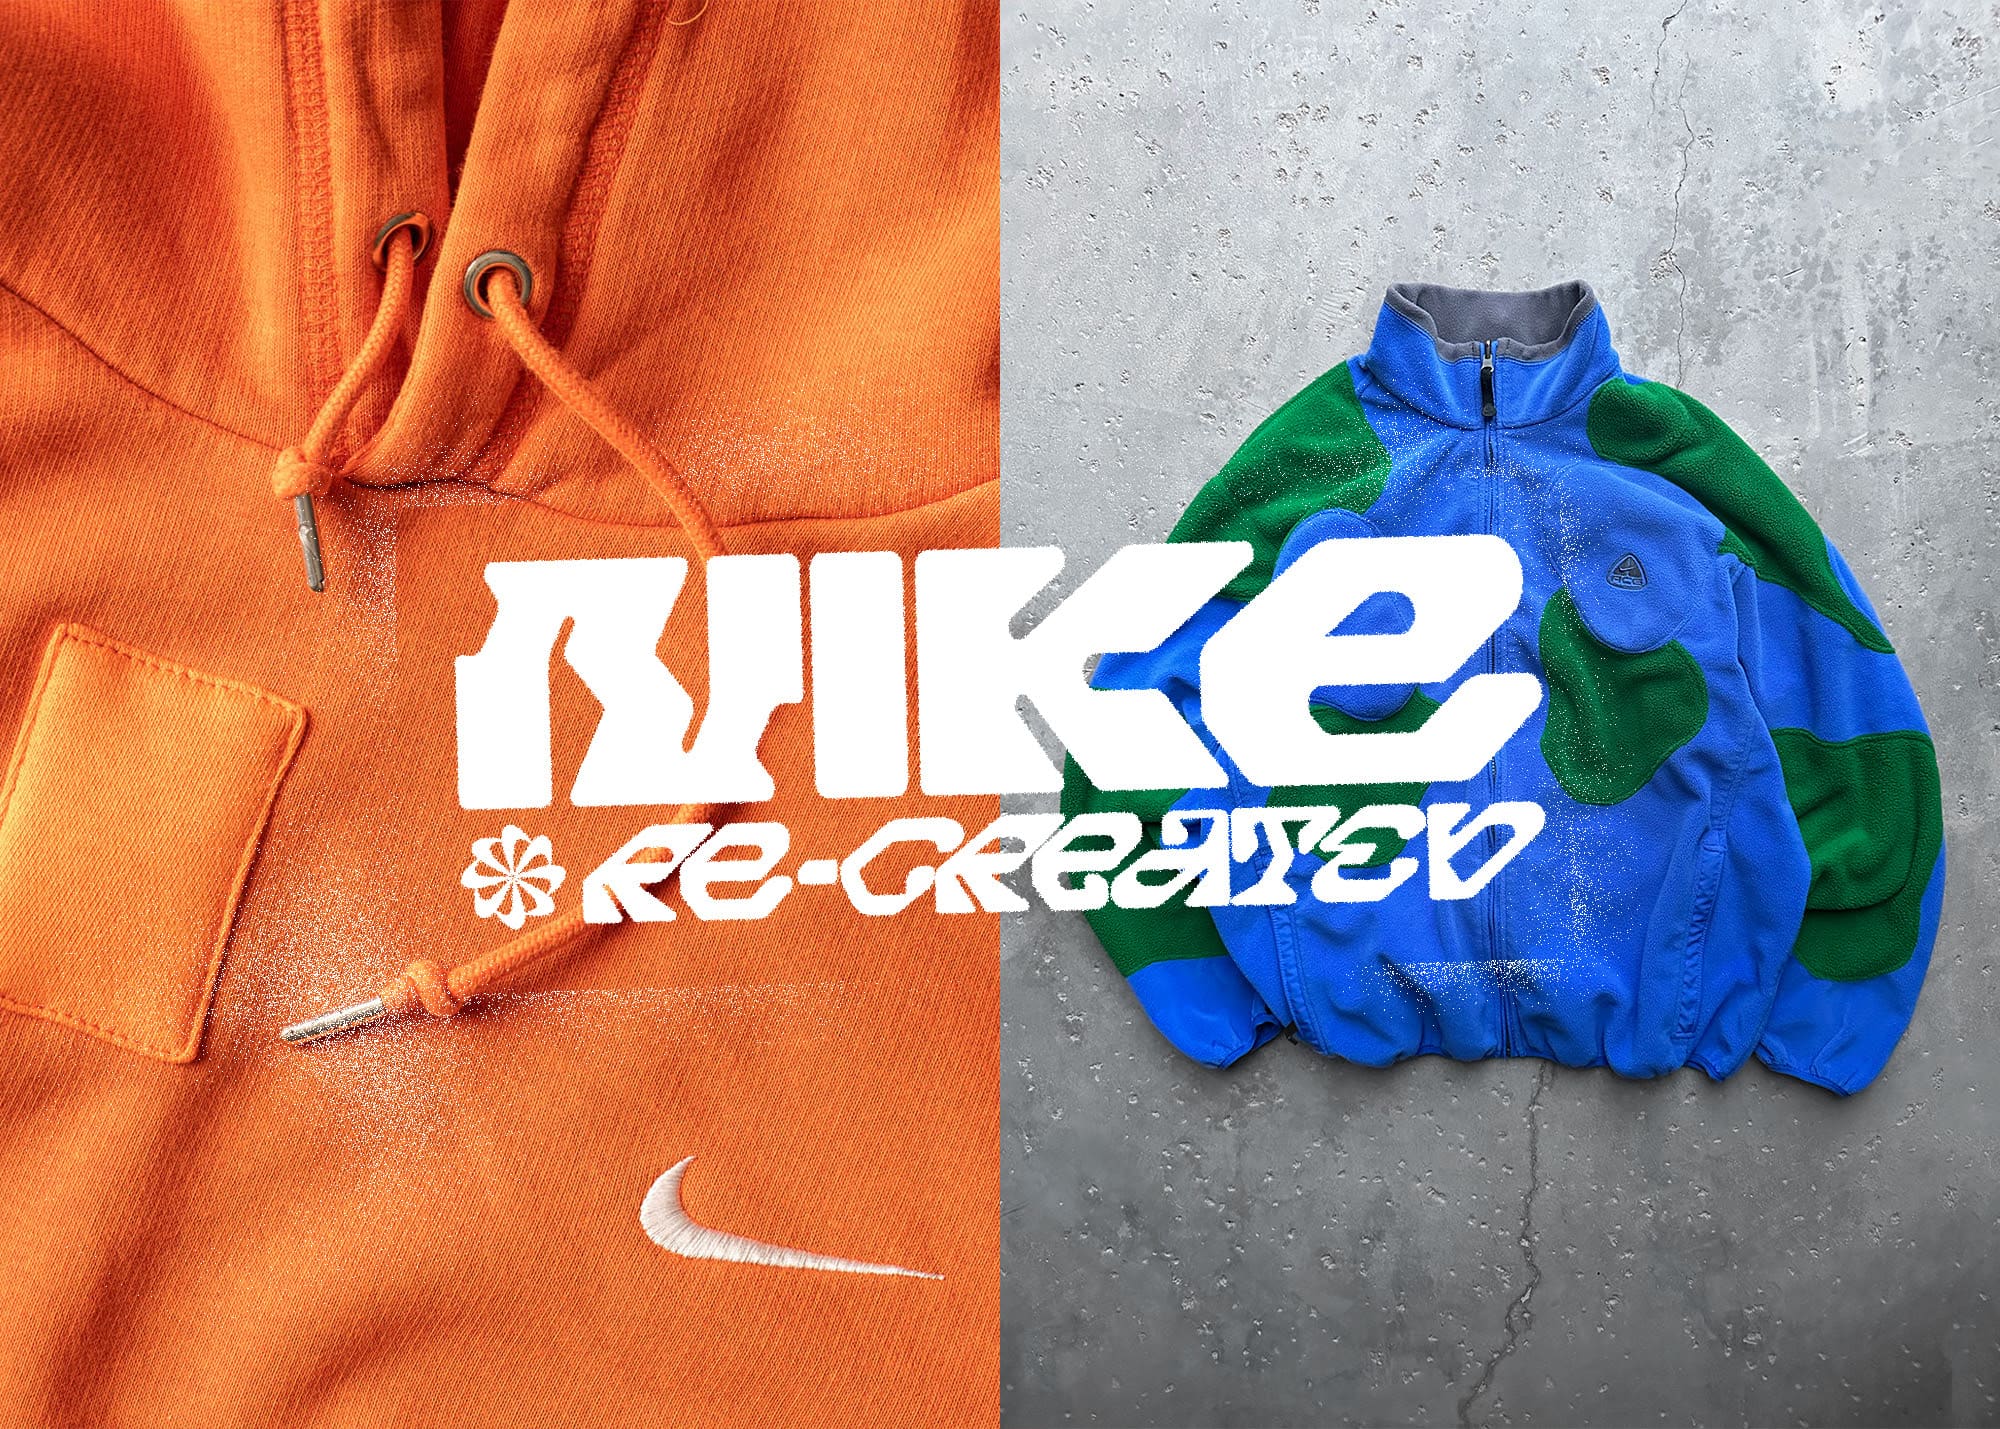 In Conversation w/ Nike Re-Creation